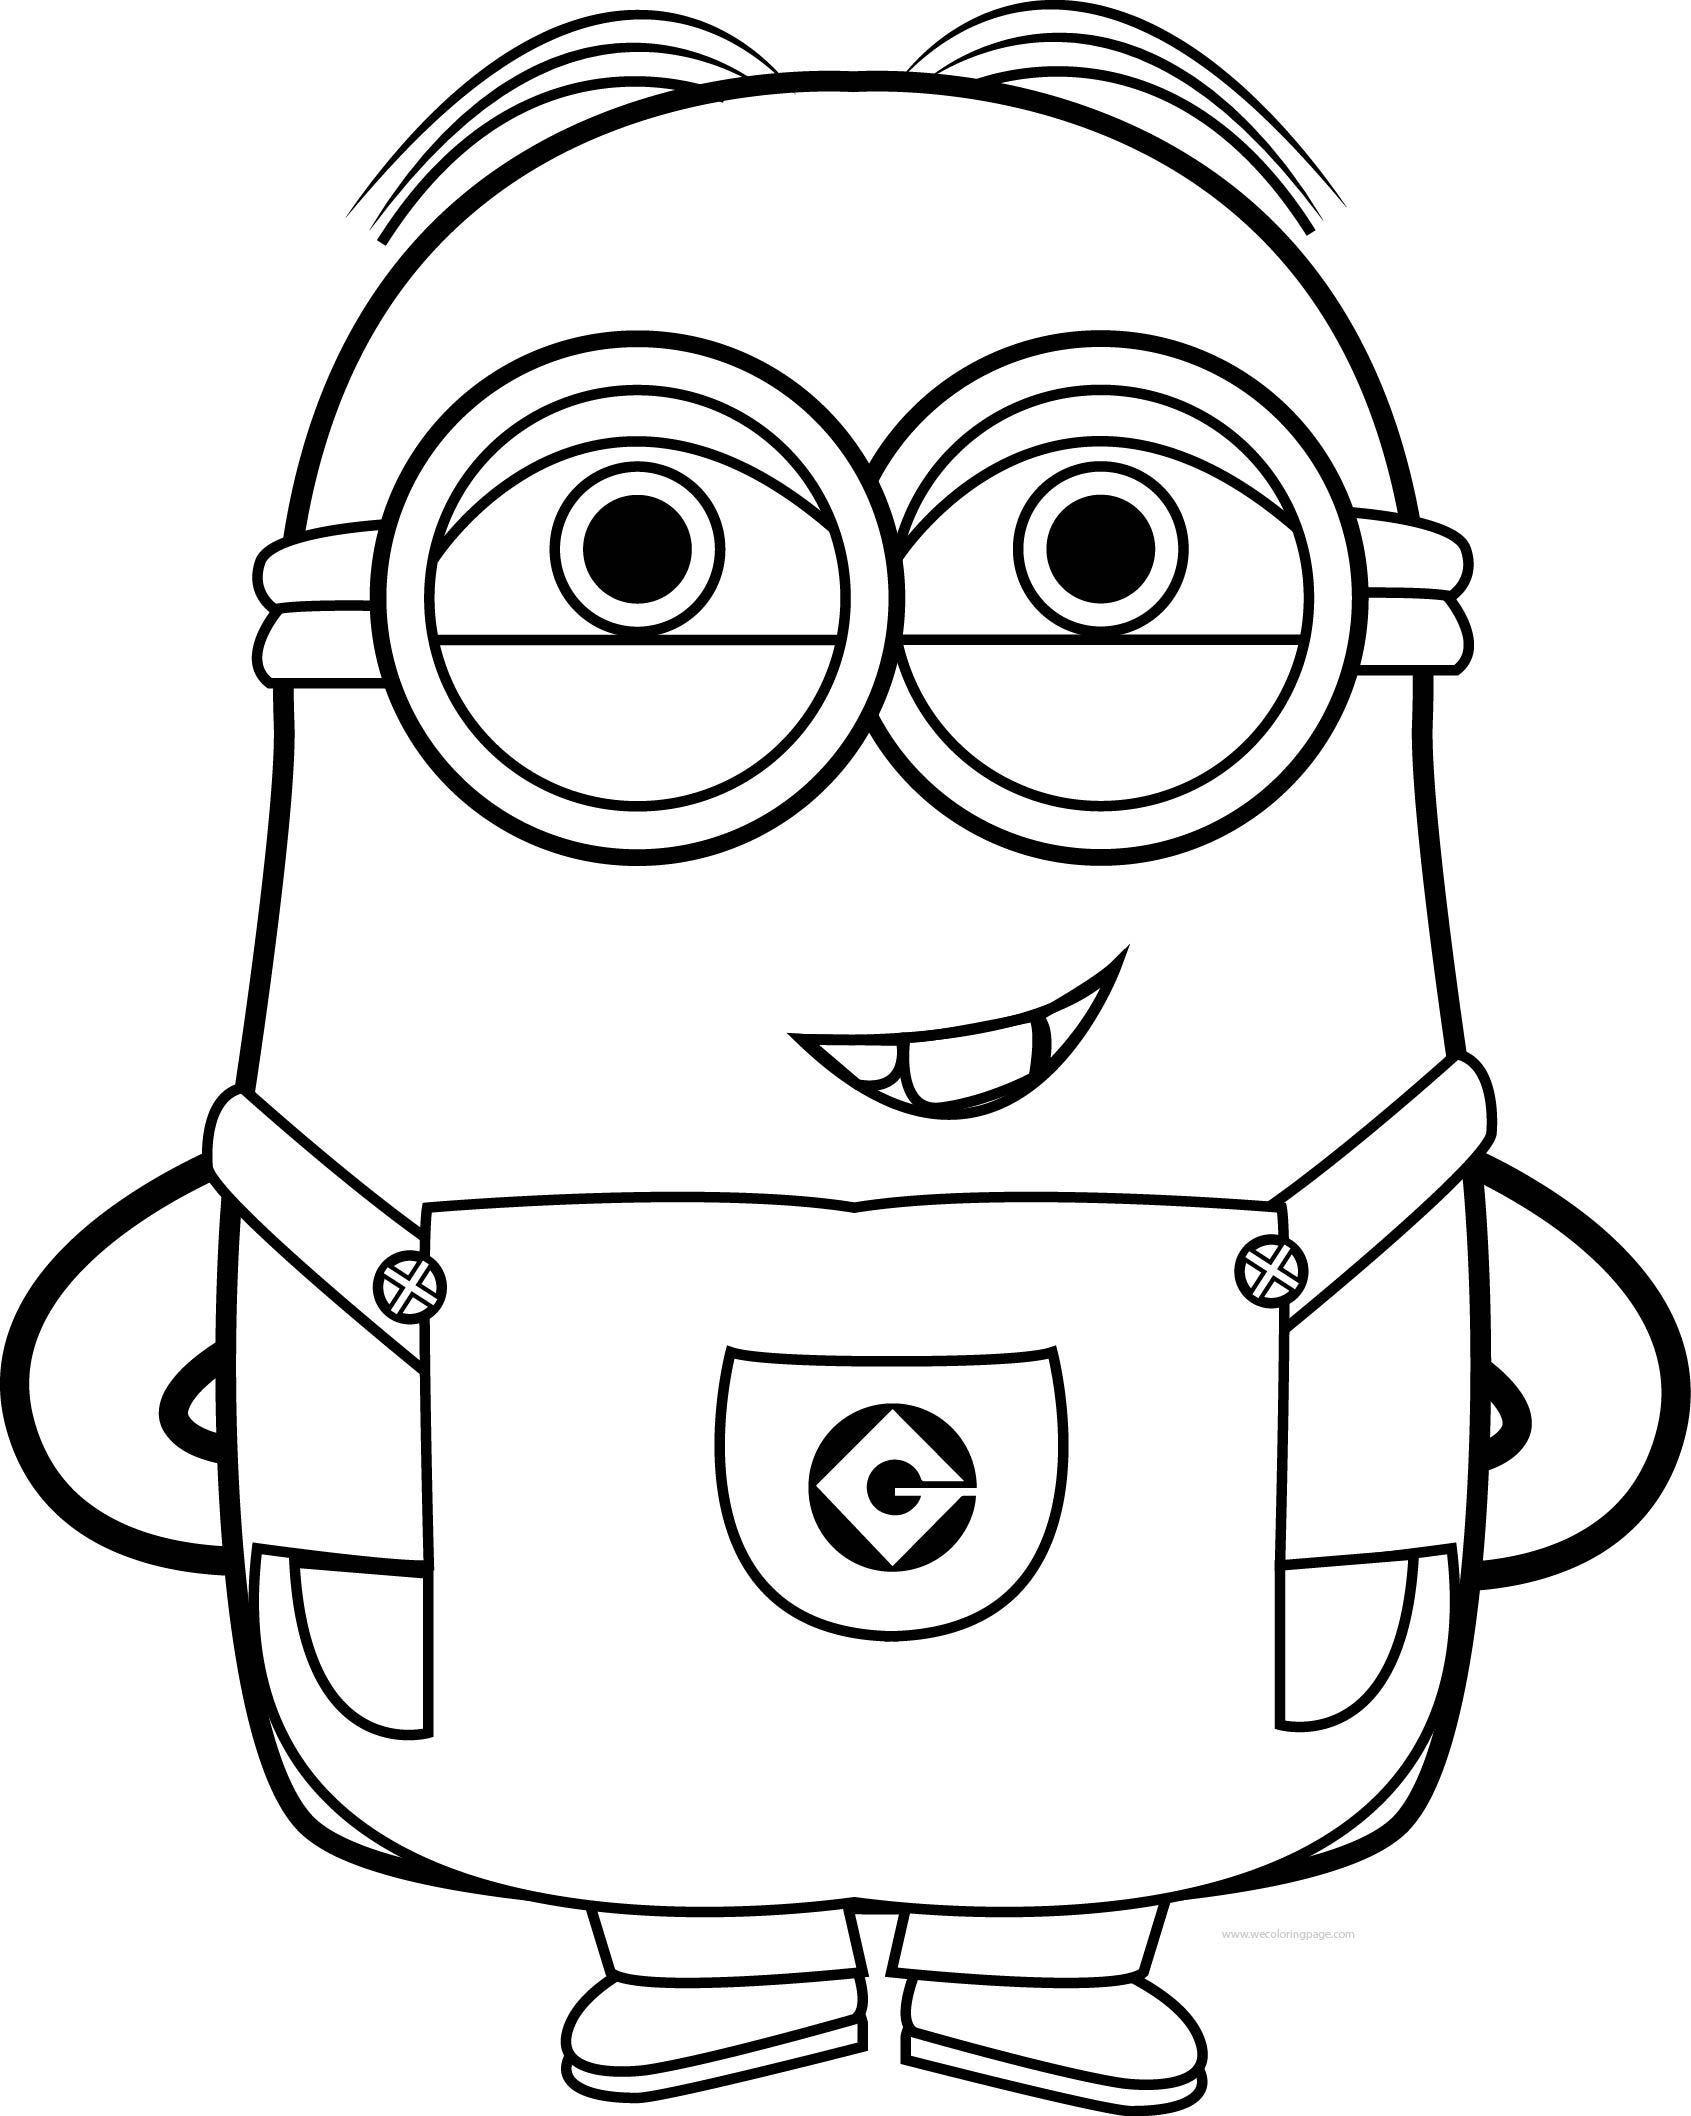 Funny Cartoon Coloring Pages at GetDrawings | Free download